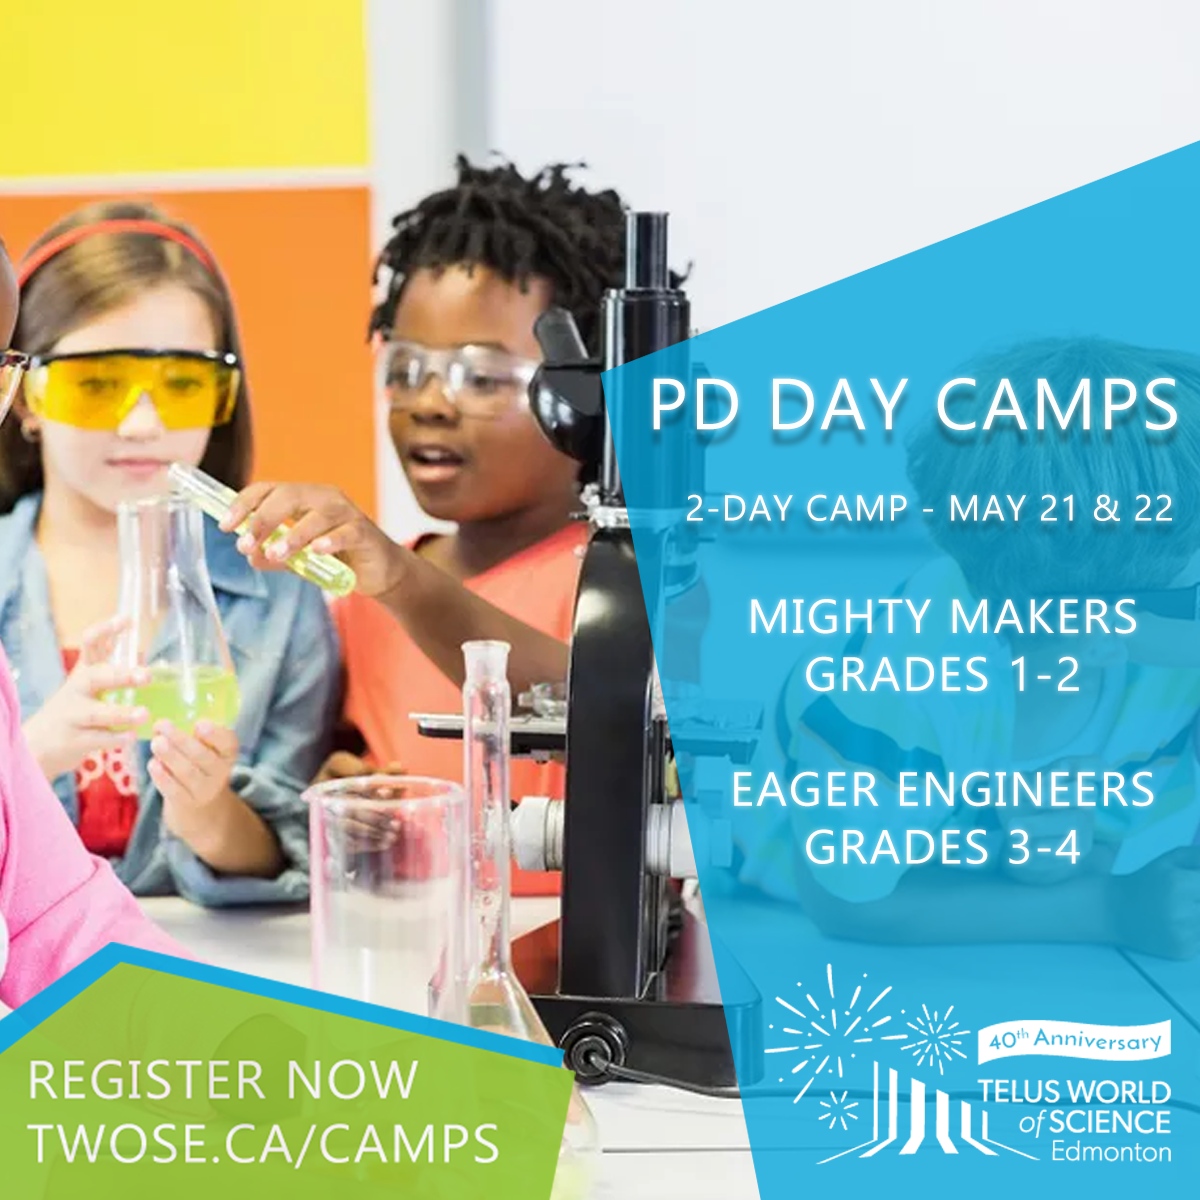 📢 Parents, don't forget! Keep your little ones engaged on PD days with 2-day camps on May 21 and 22! 👉 Mighty Makers - Grades 1-2 🧐🔍 👉 Eager Engineers - Grades 3-4 🧑‍🔬 Book now at twose.ca/camps